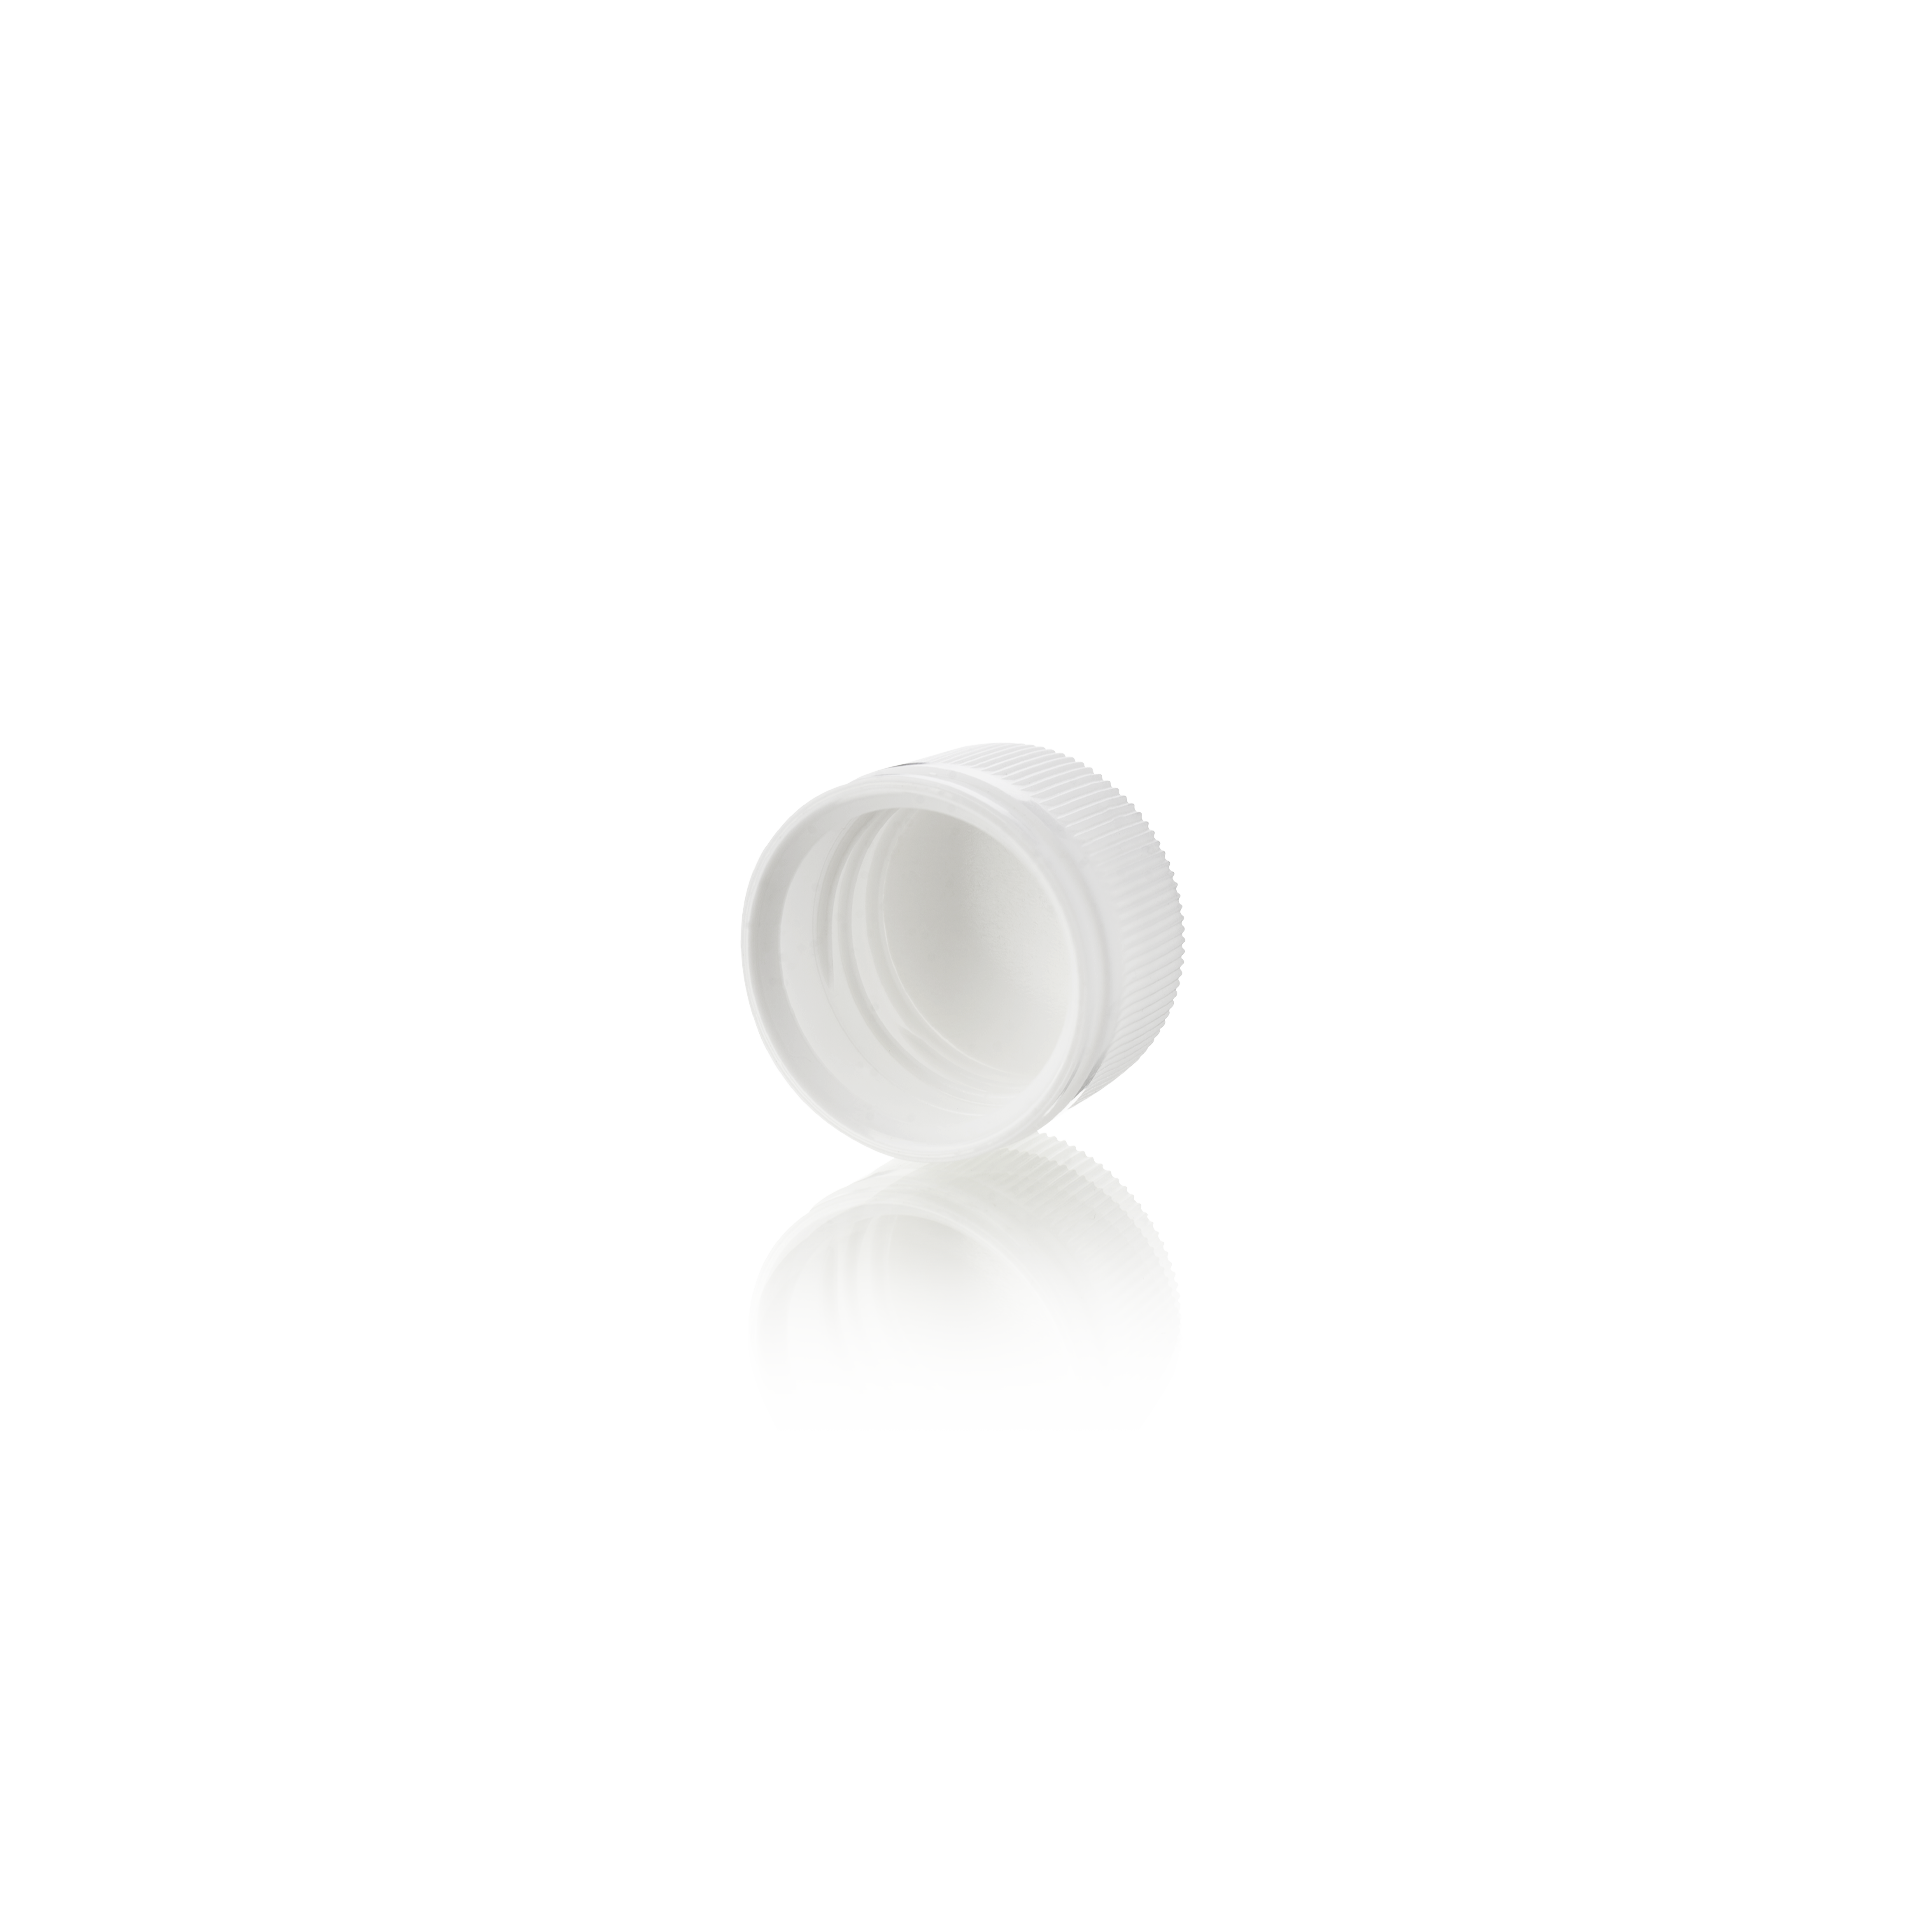 Screw cap standard PP28, HDPE, white, fine ribbed, white inlay 